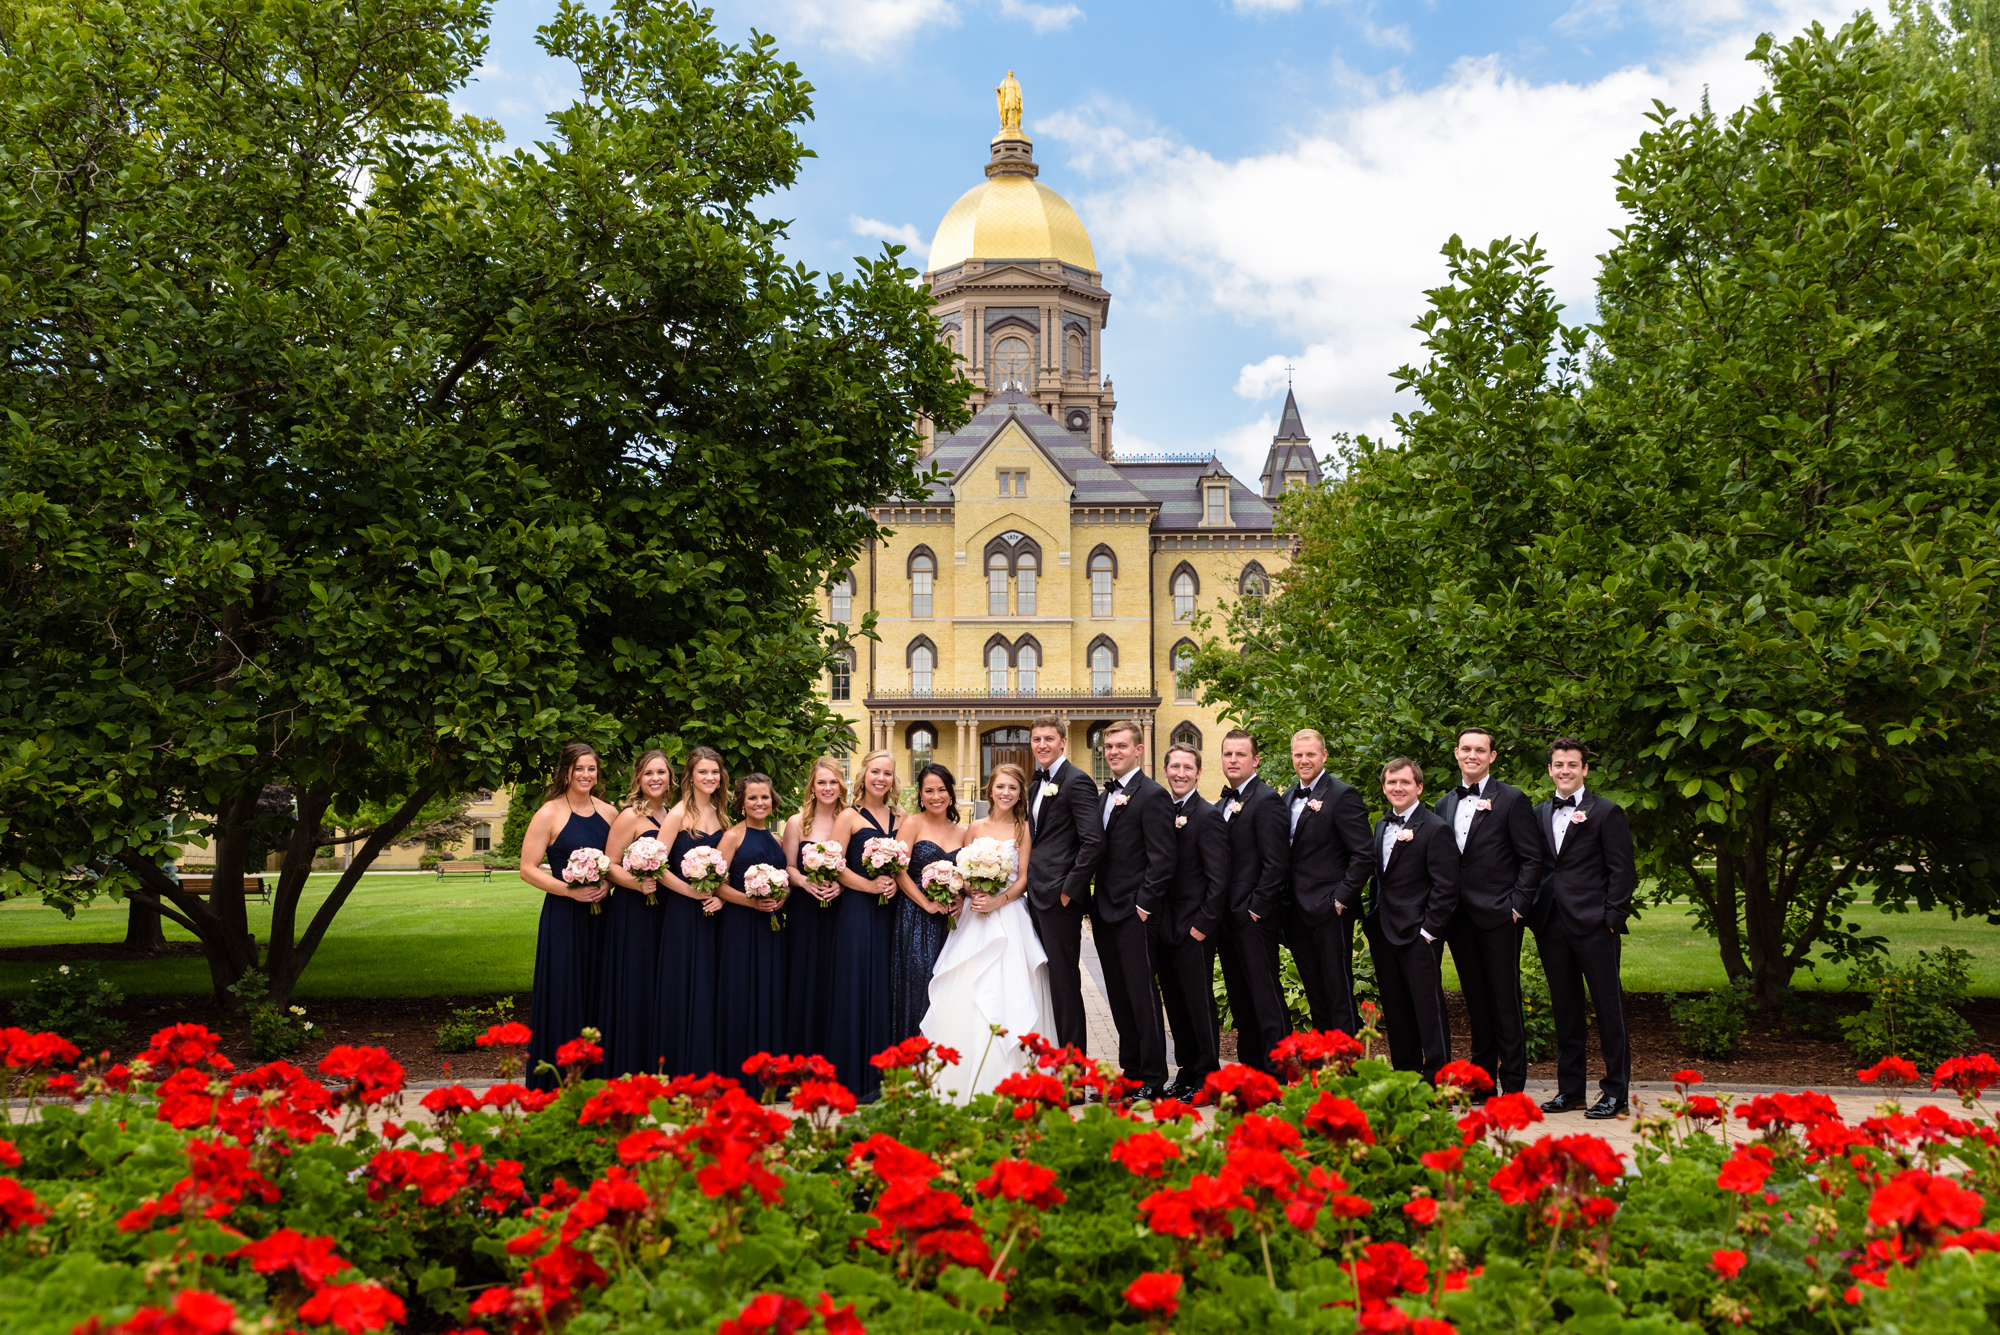 Bridal Party in front of the Golden Dome after a wedding ceremony at the Basilica of the Sacred Heart on the campus of the University of Notre Dame